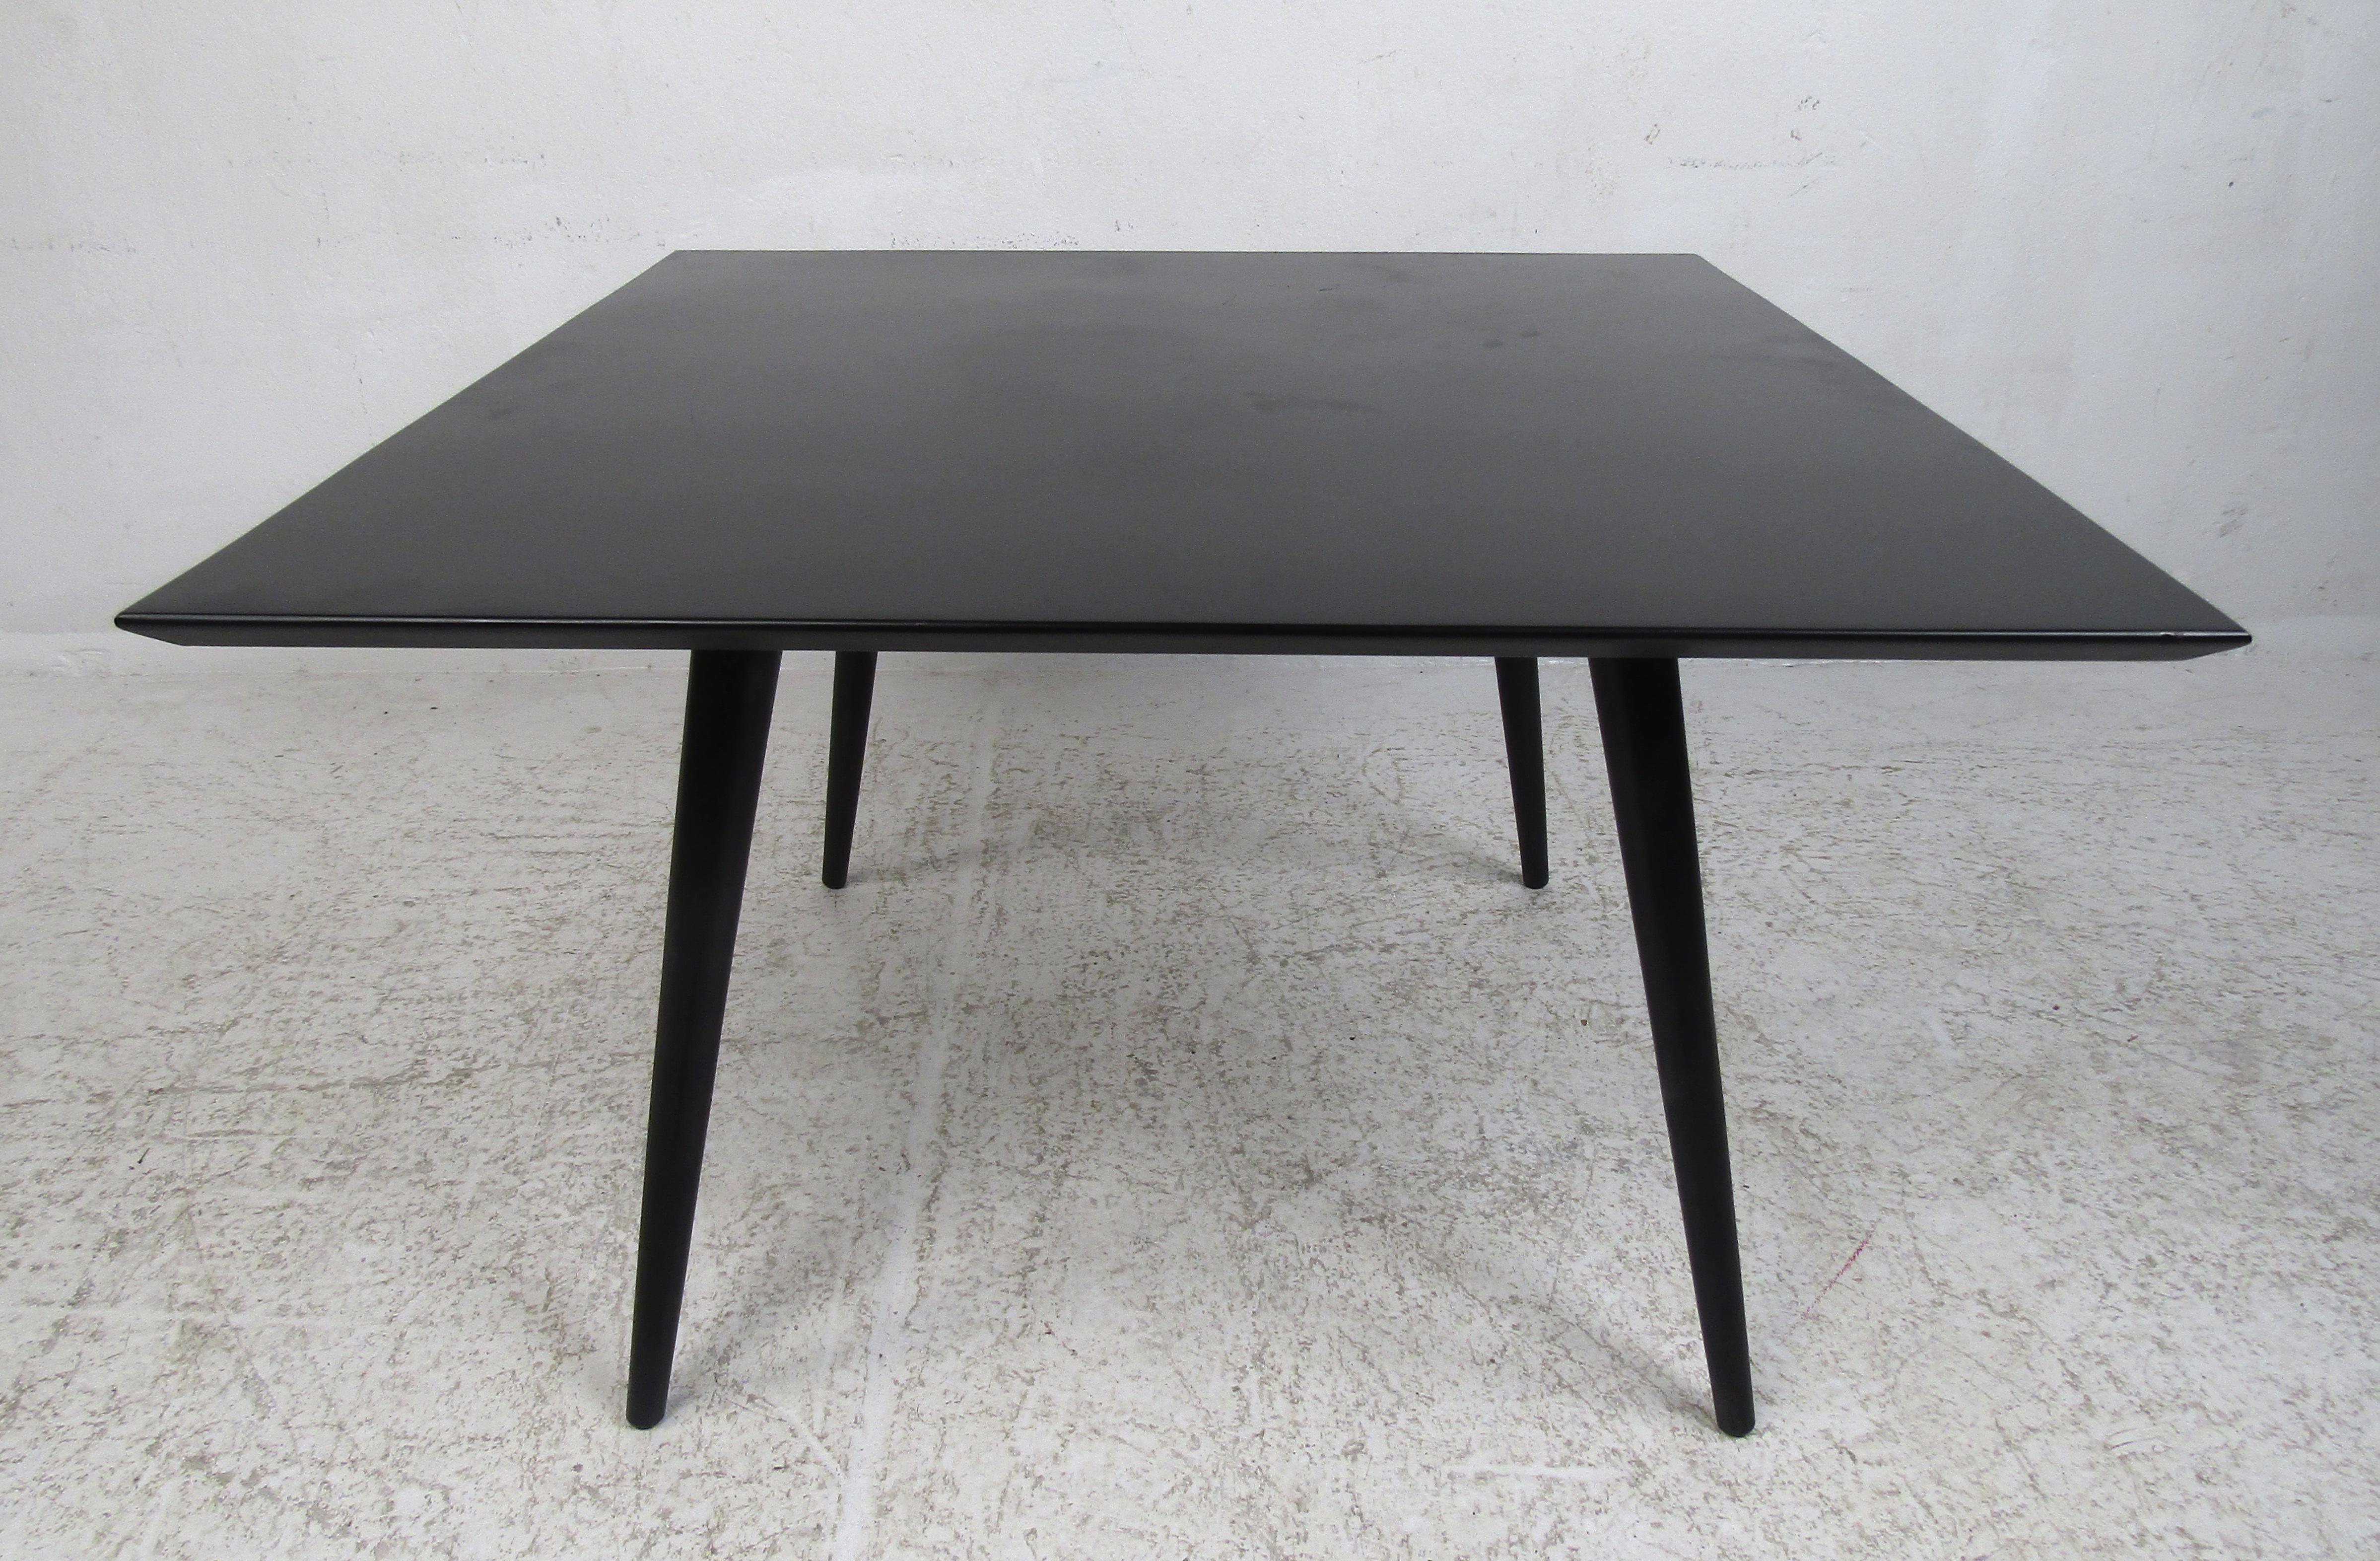 A beautiful vintage modern cocktail table by Paul McCobb with a black matte finish over wood and beveled edges. The iconic splayed and tapered legs add to the midcentury appeal. This sleek and functional square midcentury coffee table makes the